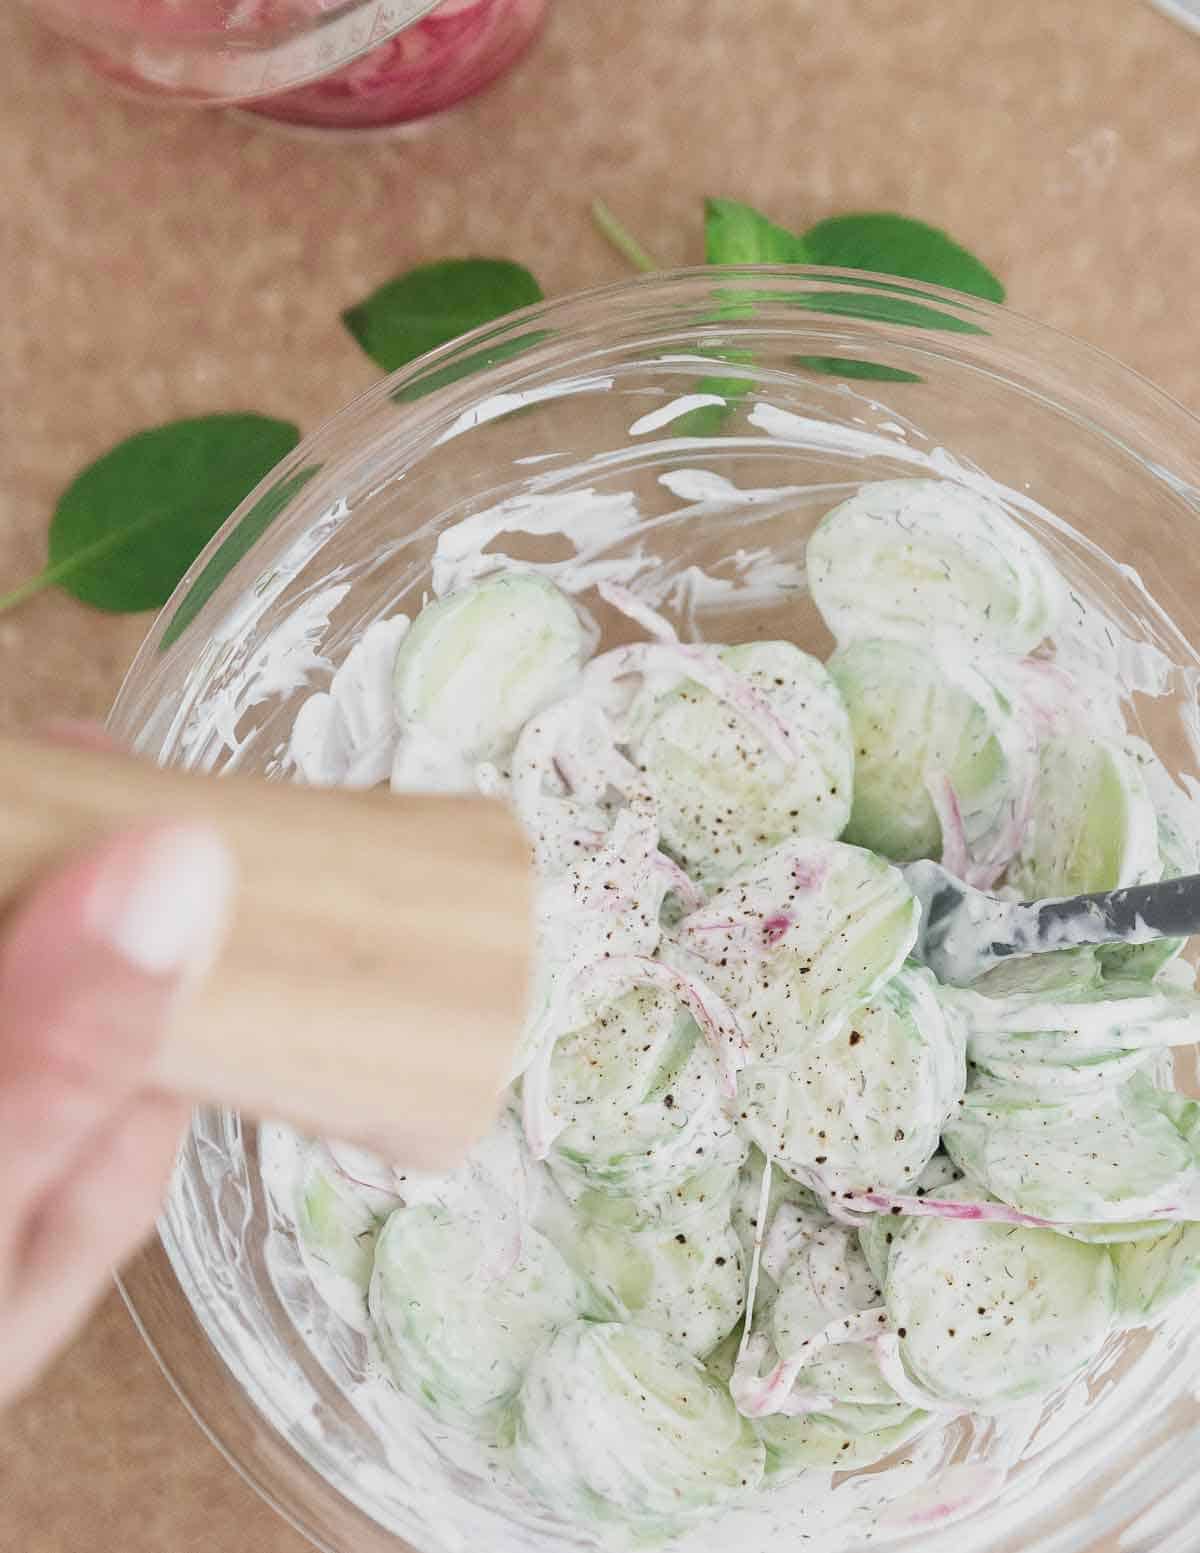 Simple seasonings like garlic, dill, salt and pepper are all you need for this creamy cucumber and onion salad recipe.